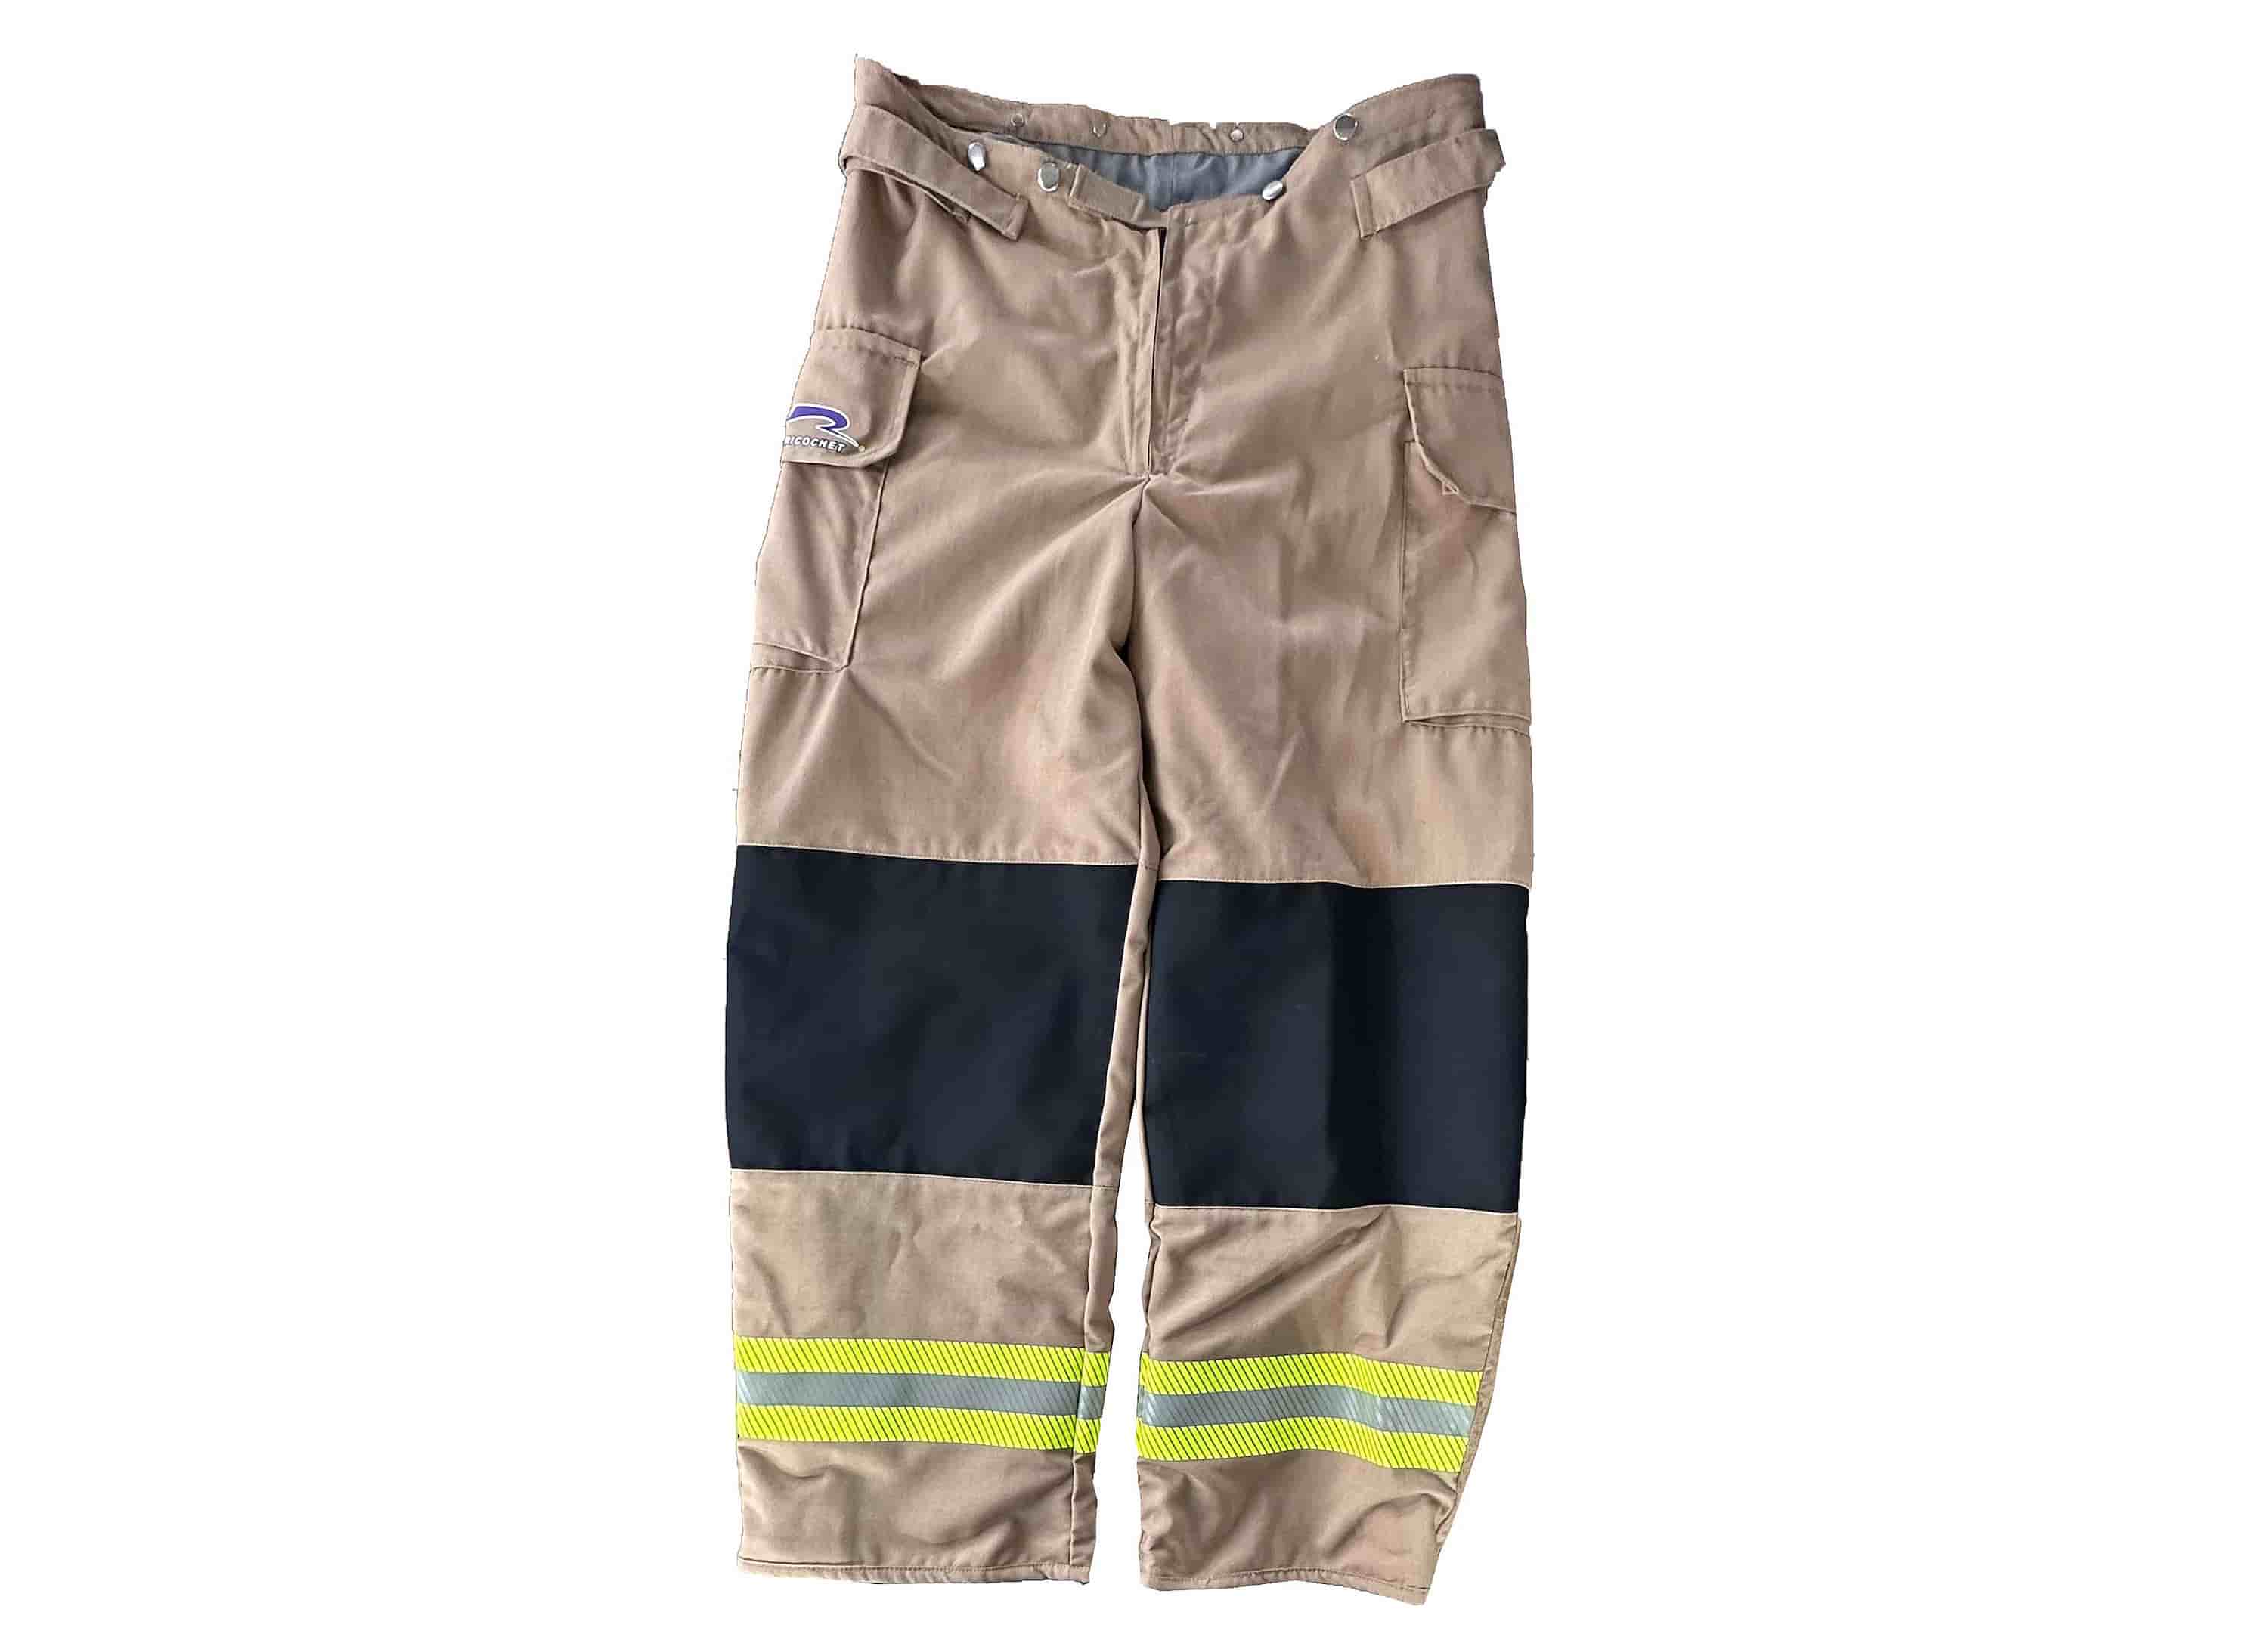 Technical Rescue Pant in TAN